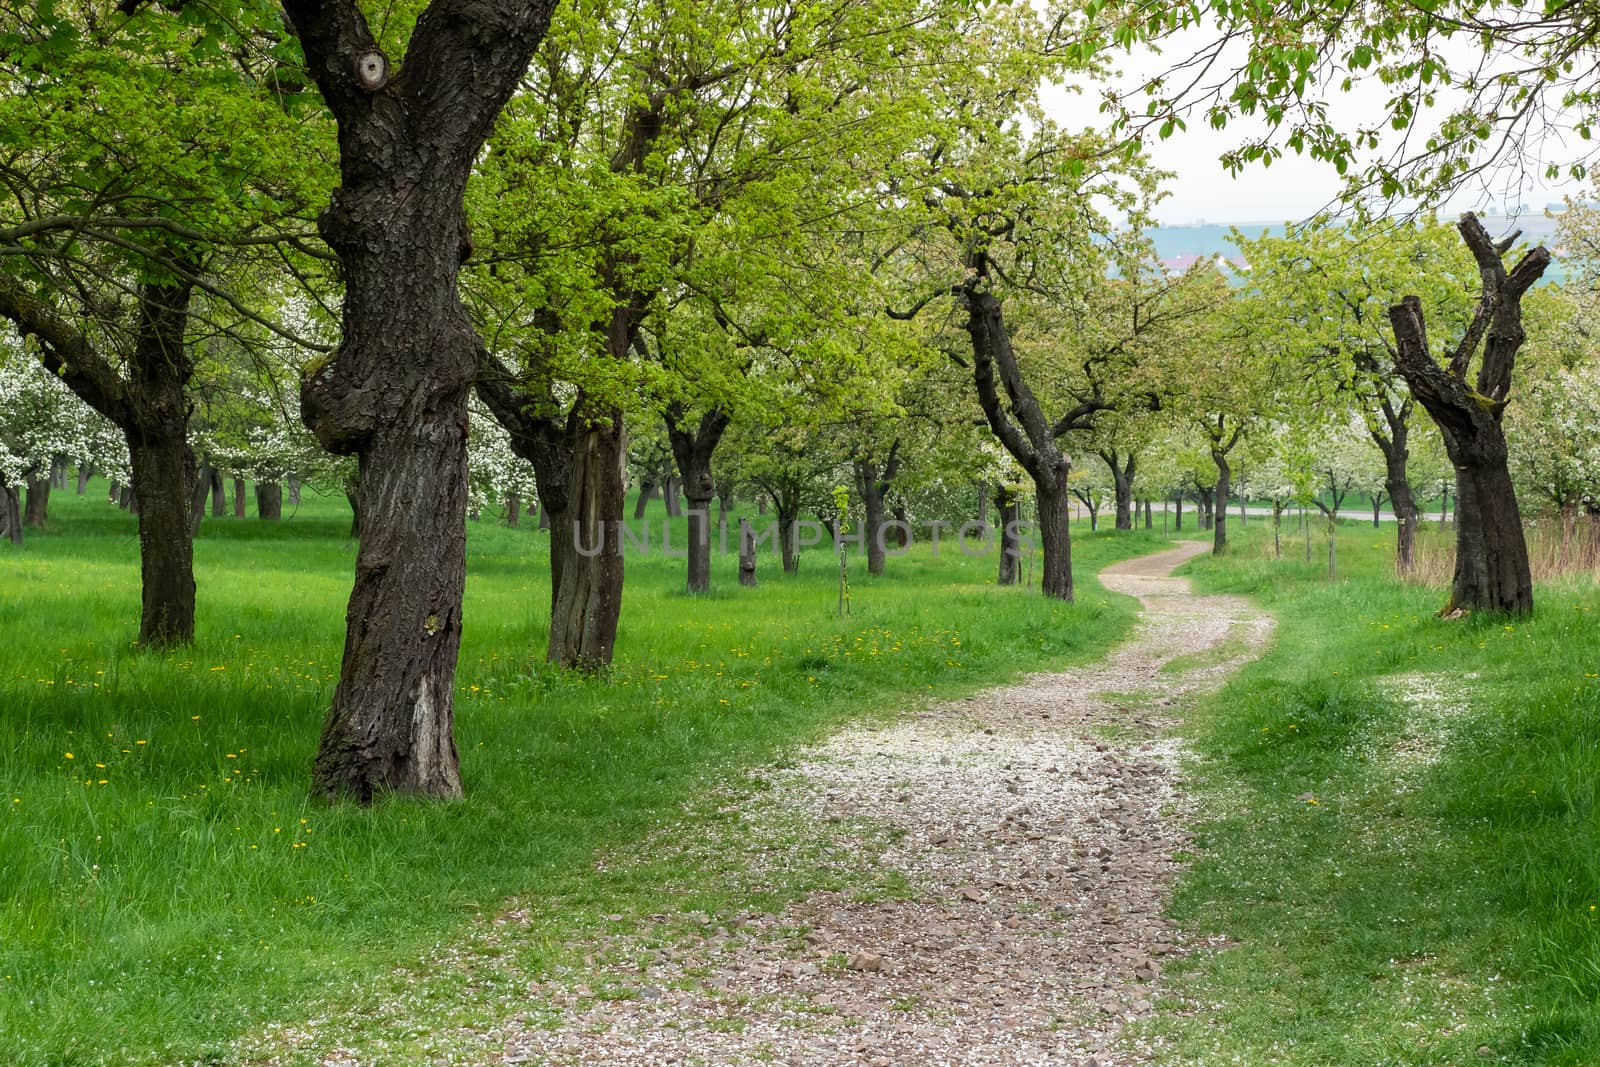 Park trail between blooming cherry trees in spring. Park with flowering trees and green grass.